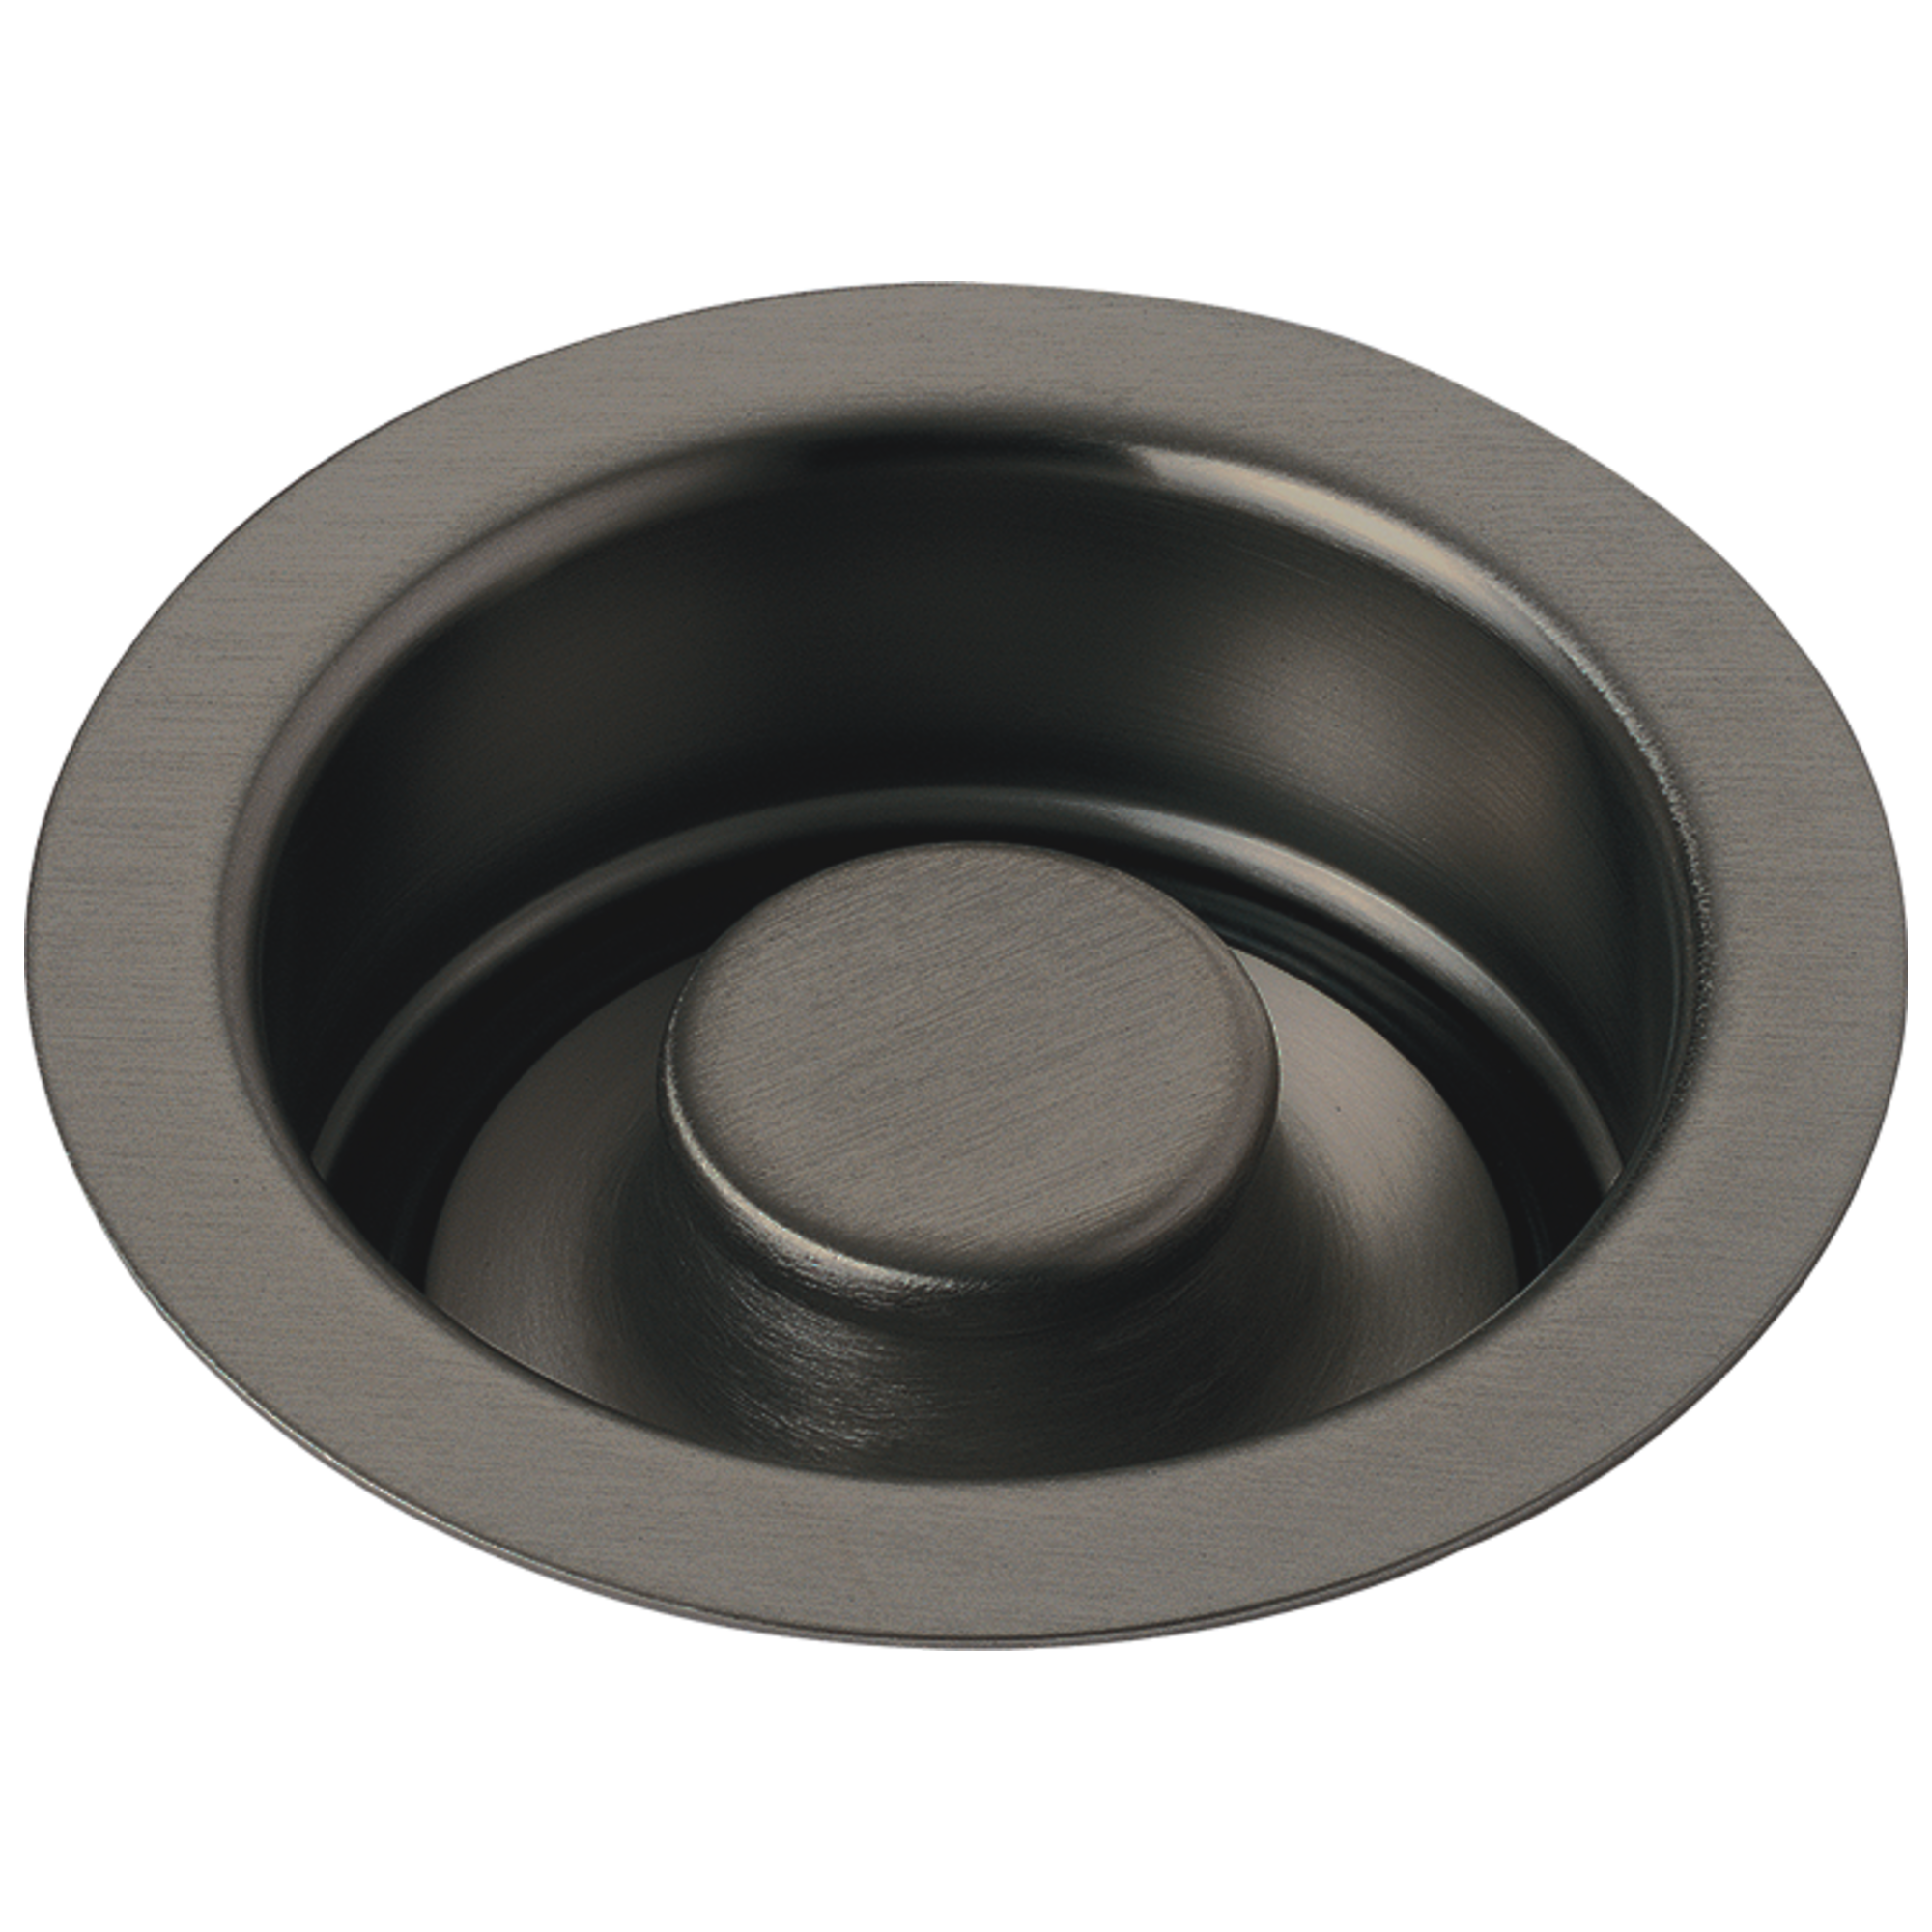 Brizo Rook Kitchen Disposal and Flange Stopper